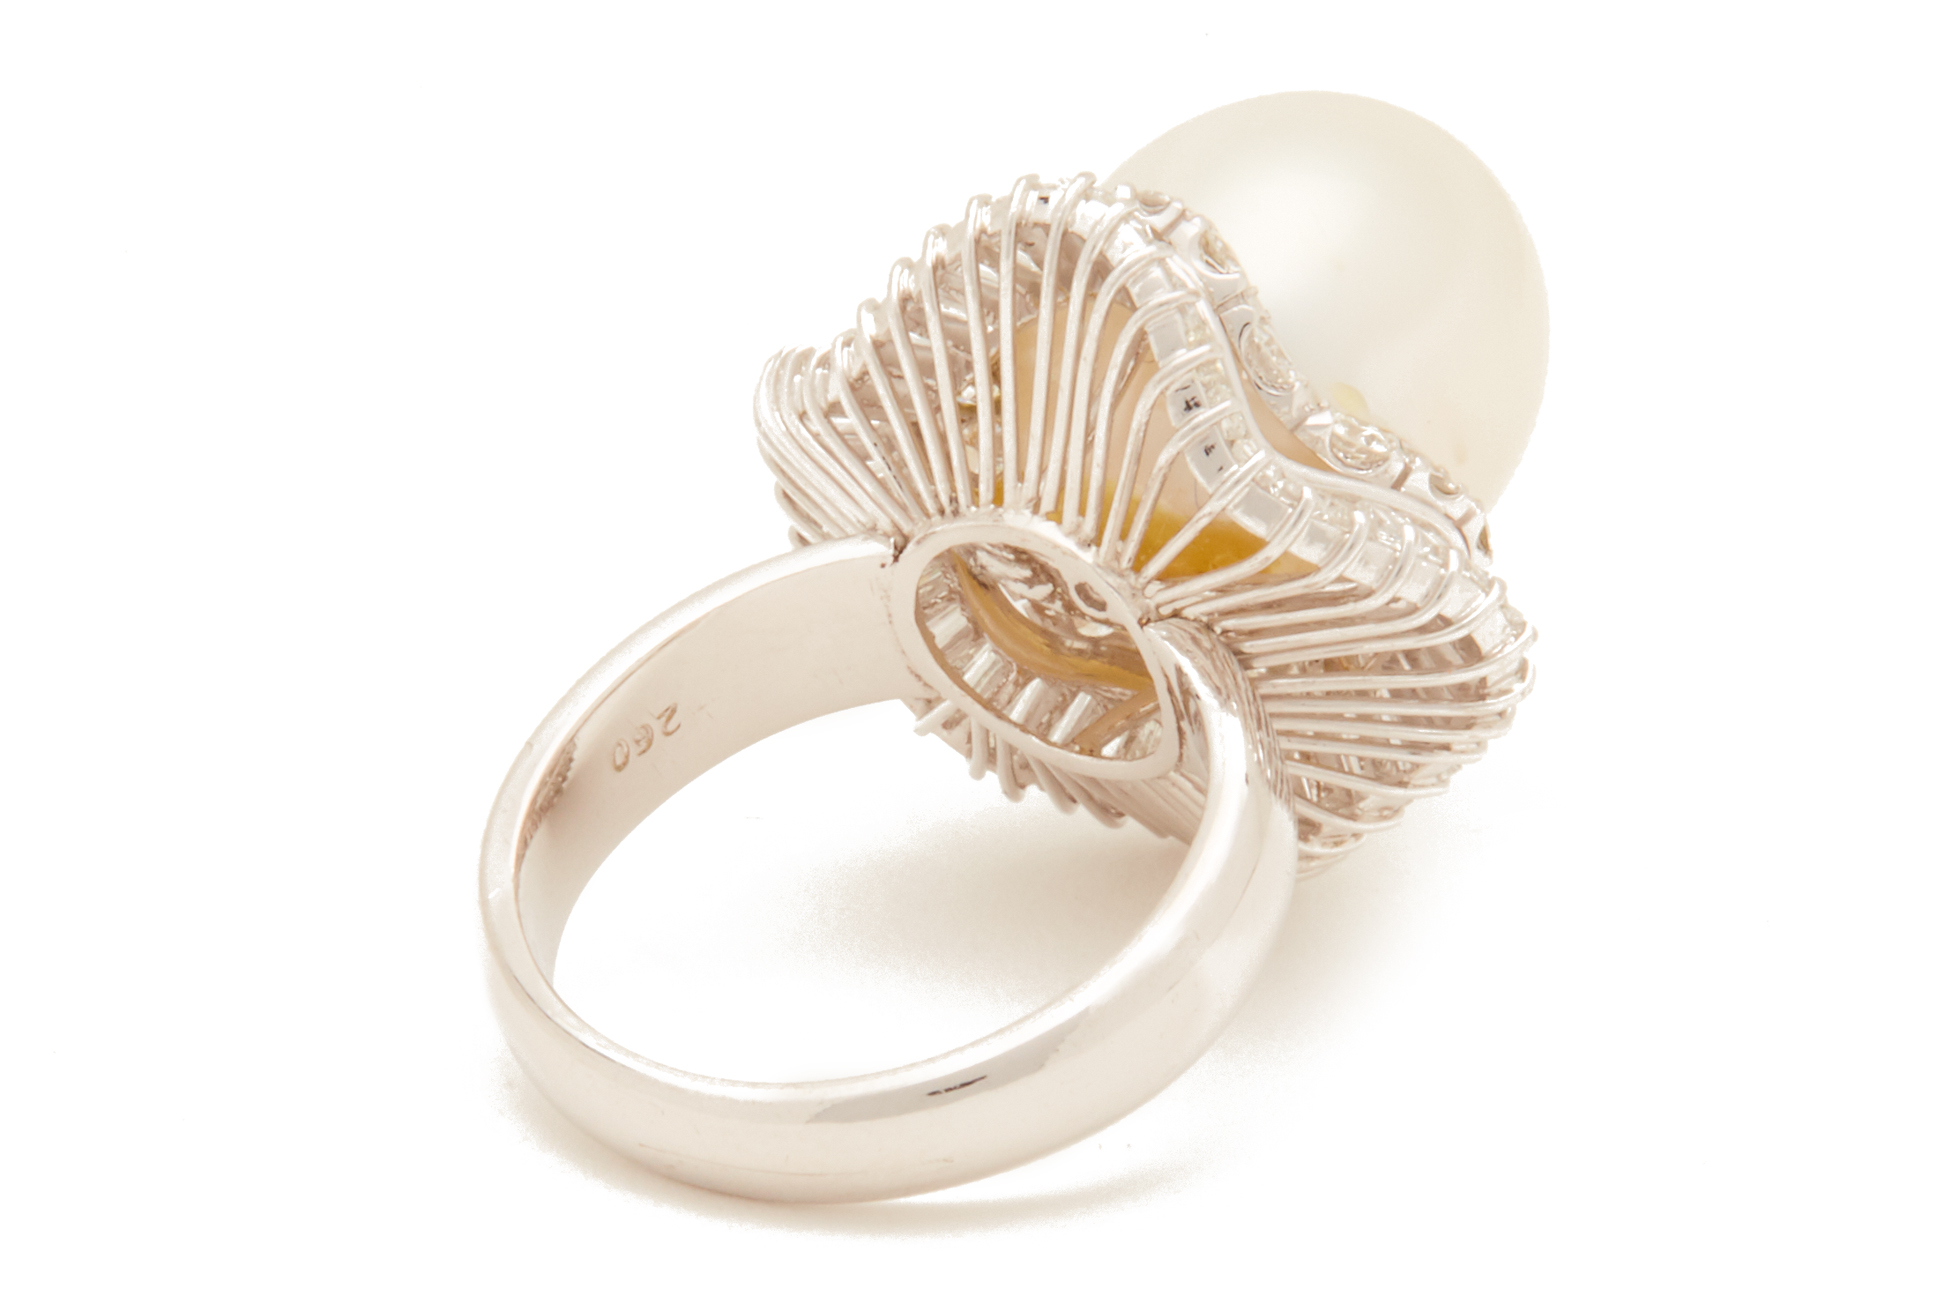 A SOUTH SEA PEARL AND DIAMOND BALLERINA RING - Image 3 of 3